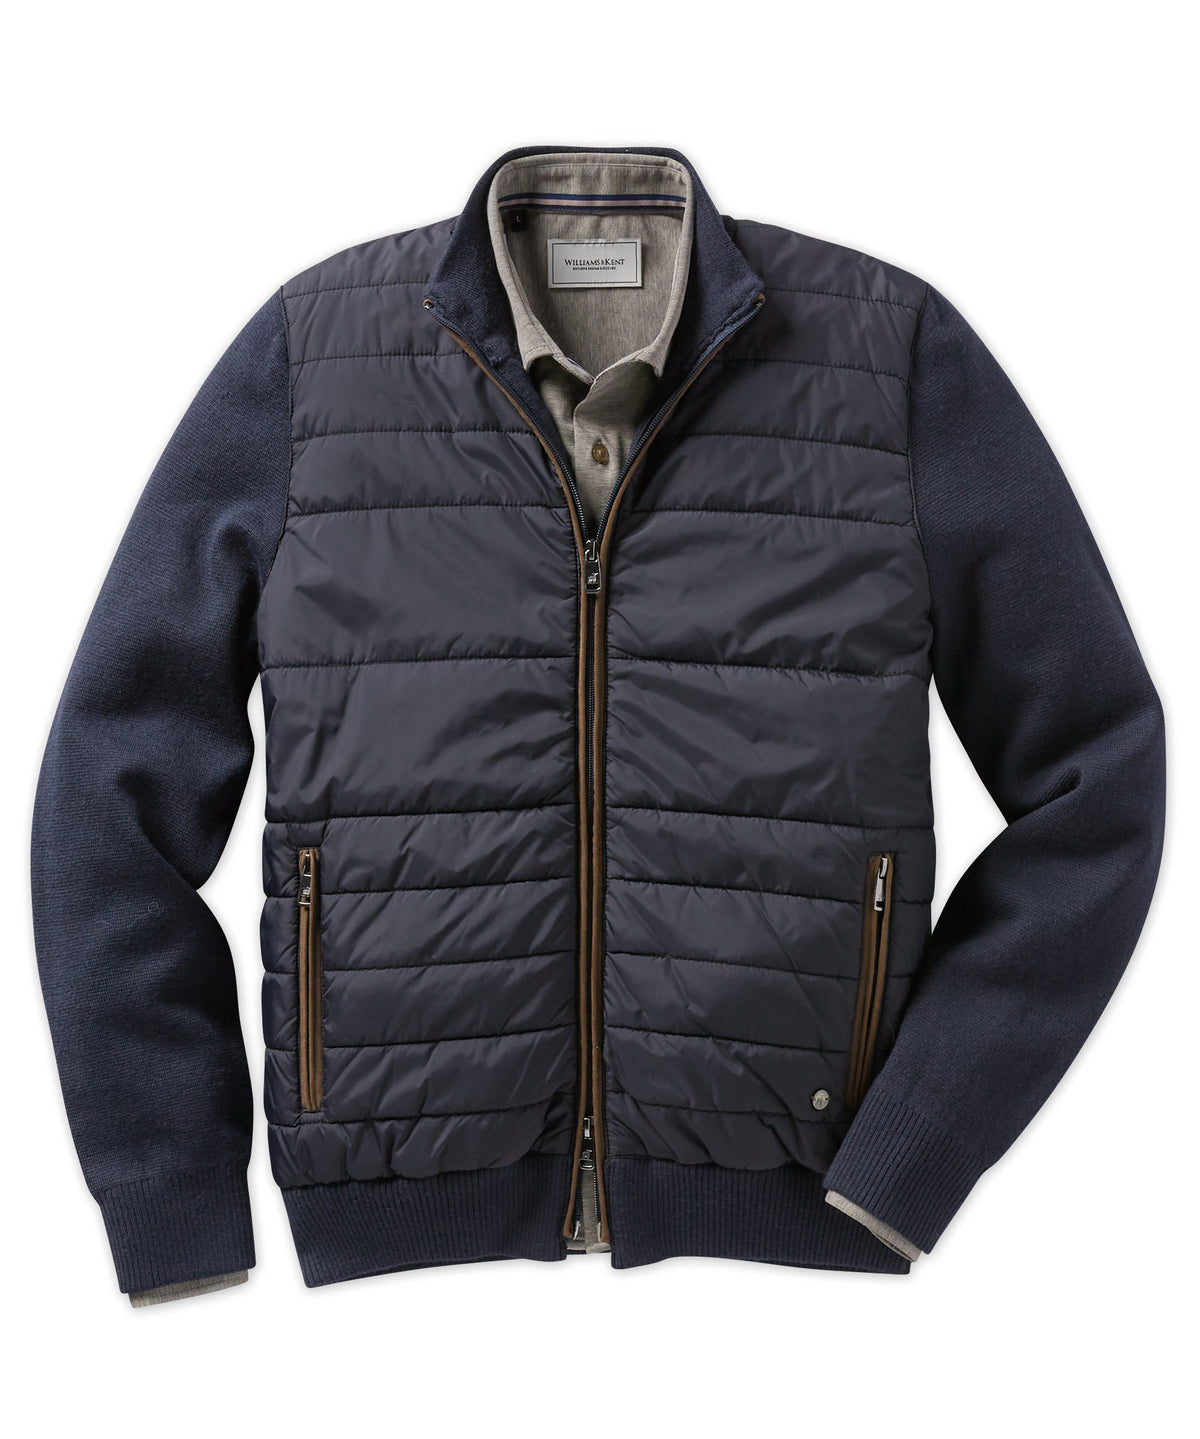 Nylon Quilted Front-Zip Jacket with Knit Sleeves